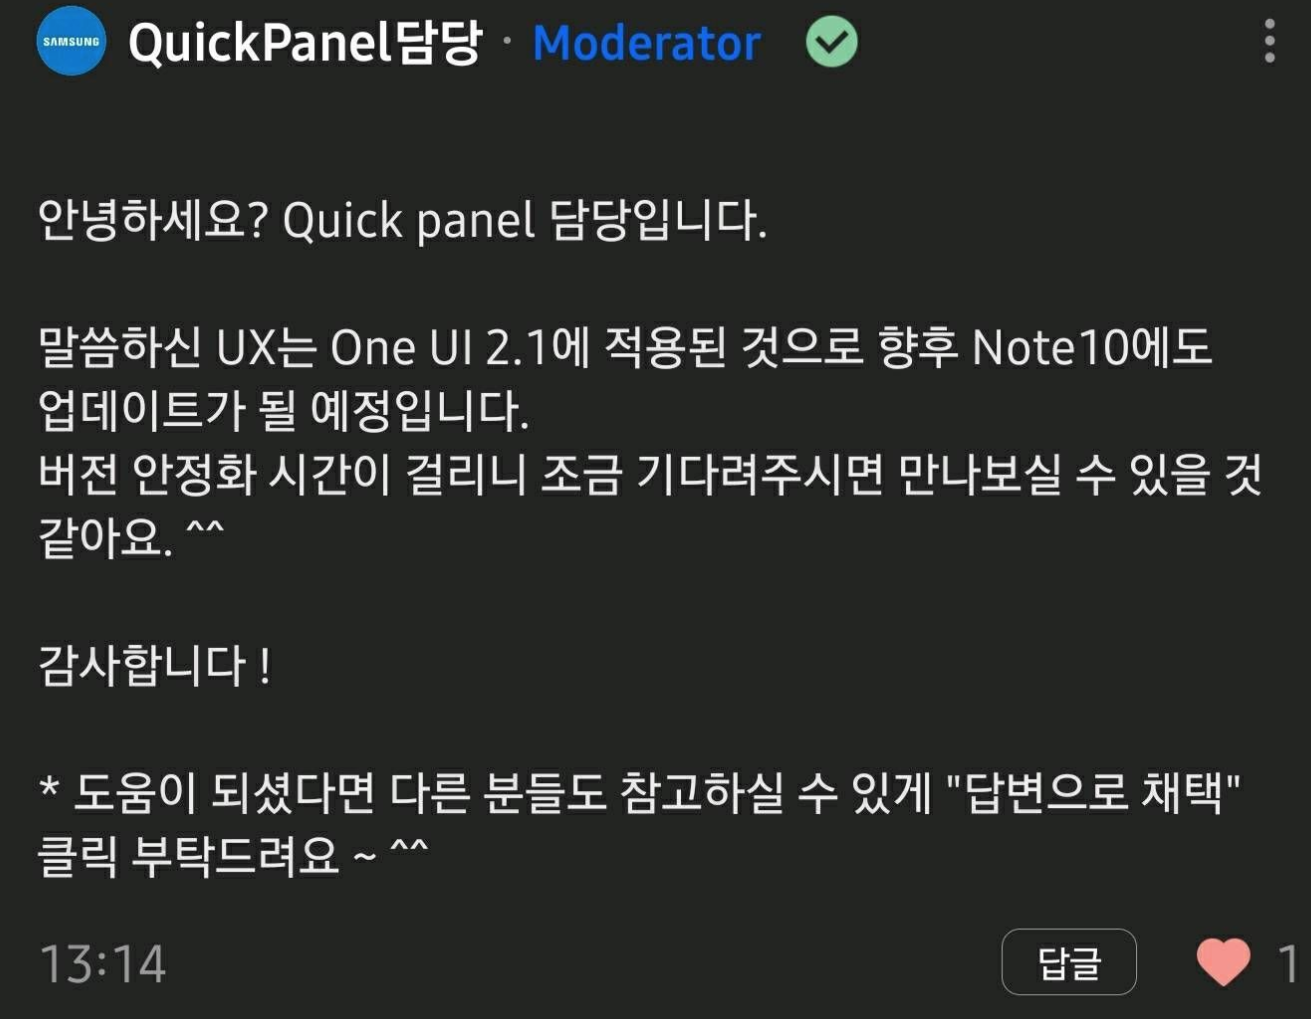 Samsung Korea promises that the S20's One UI 2.1 on Android 10 features will trickle down to Note 10, Note 9 and even S9 - Samsung may update the Note 10, Note 9 and S9 to Galaxy S20's Android 10 with One UI 2.1